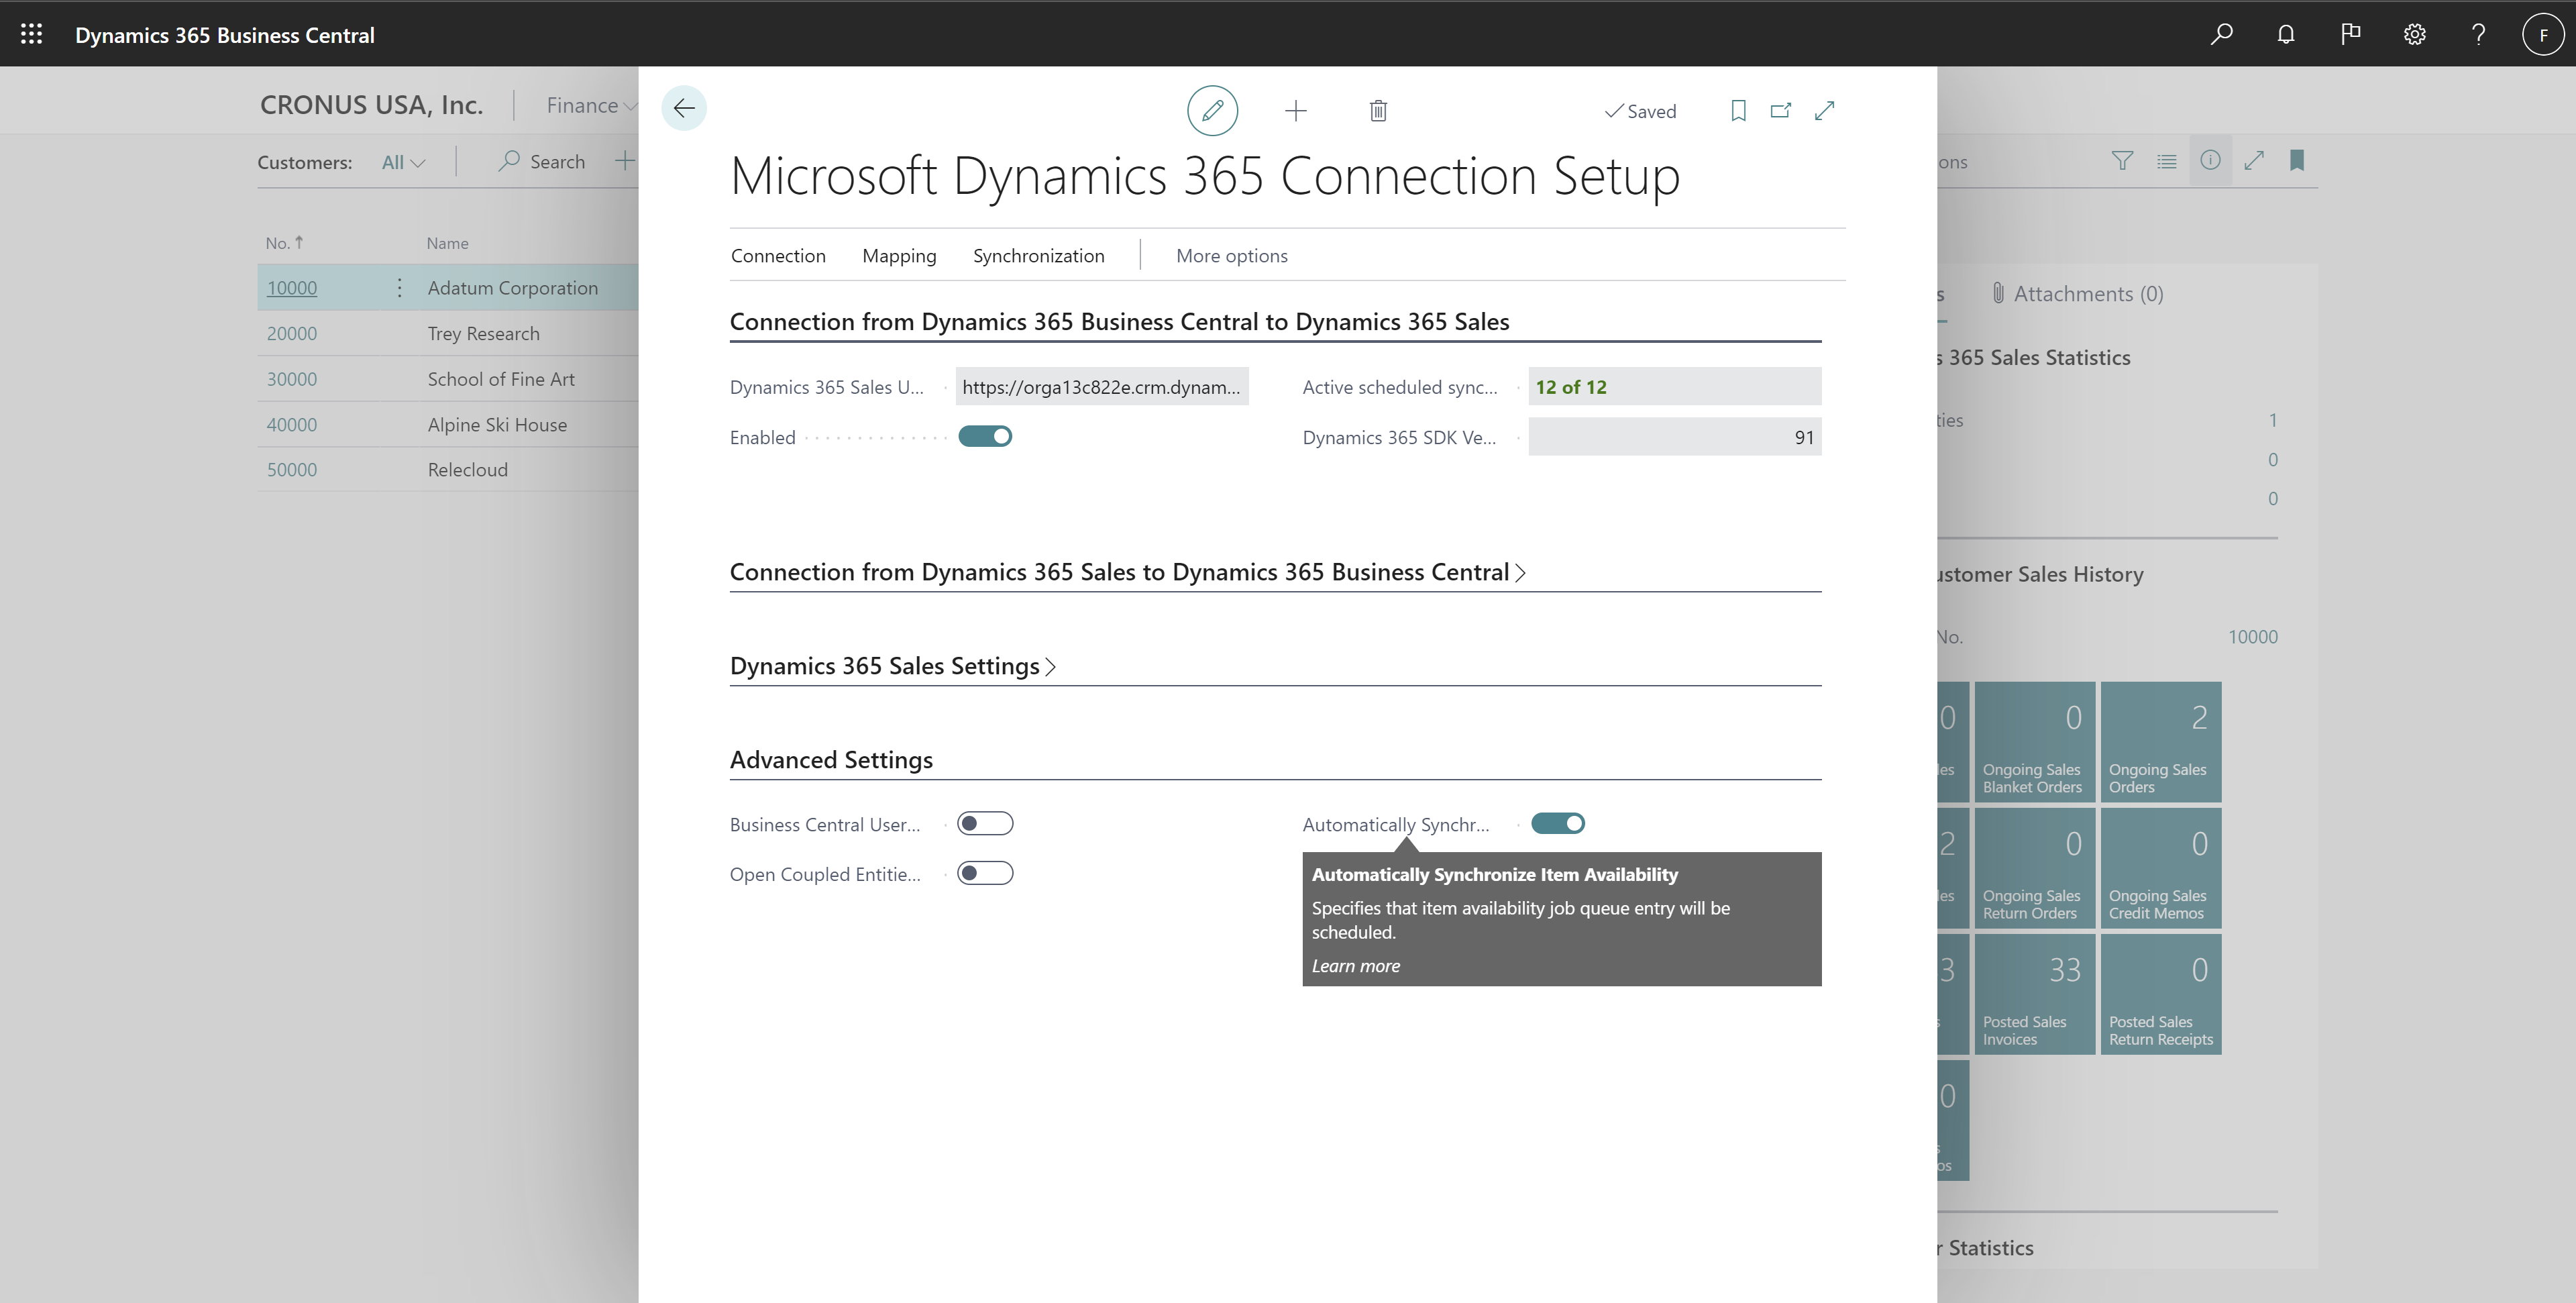 Dynamics 365 Connection Setup page's Automatically Synchronize Item Availability check box